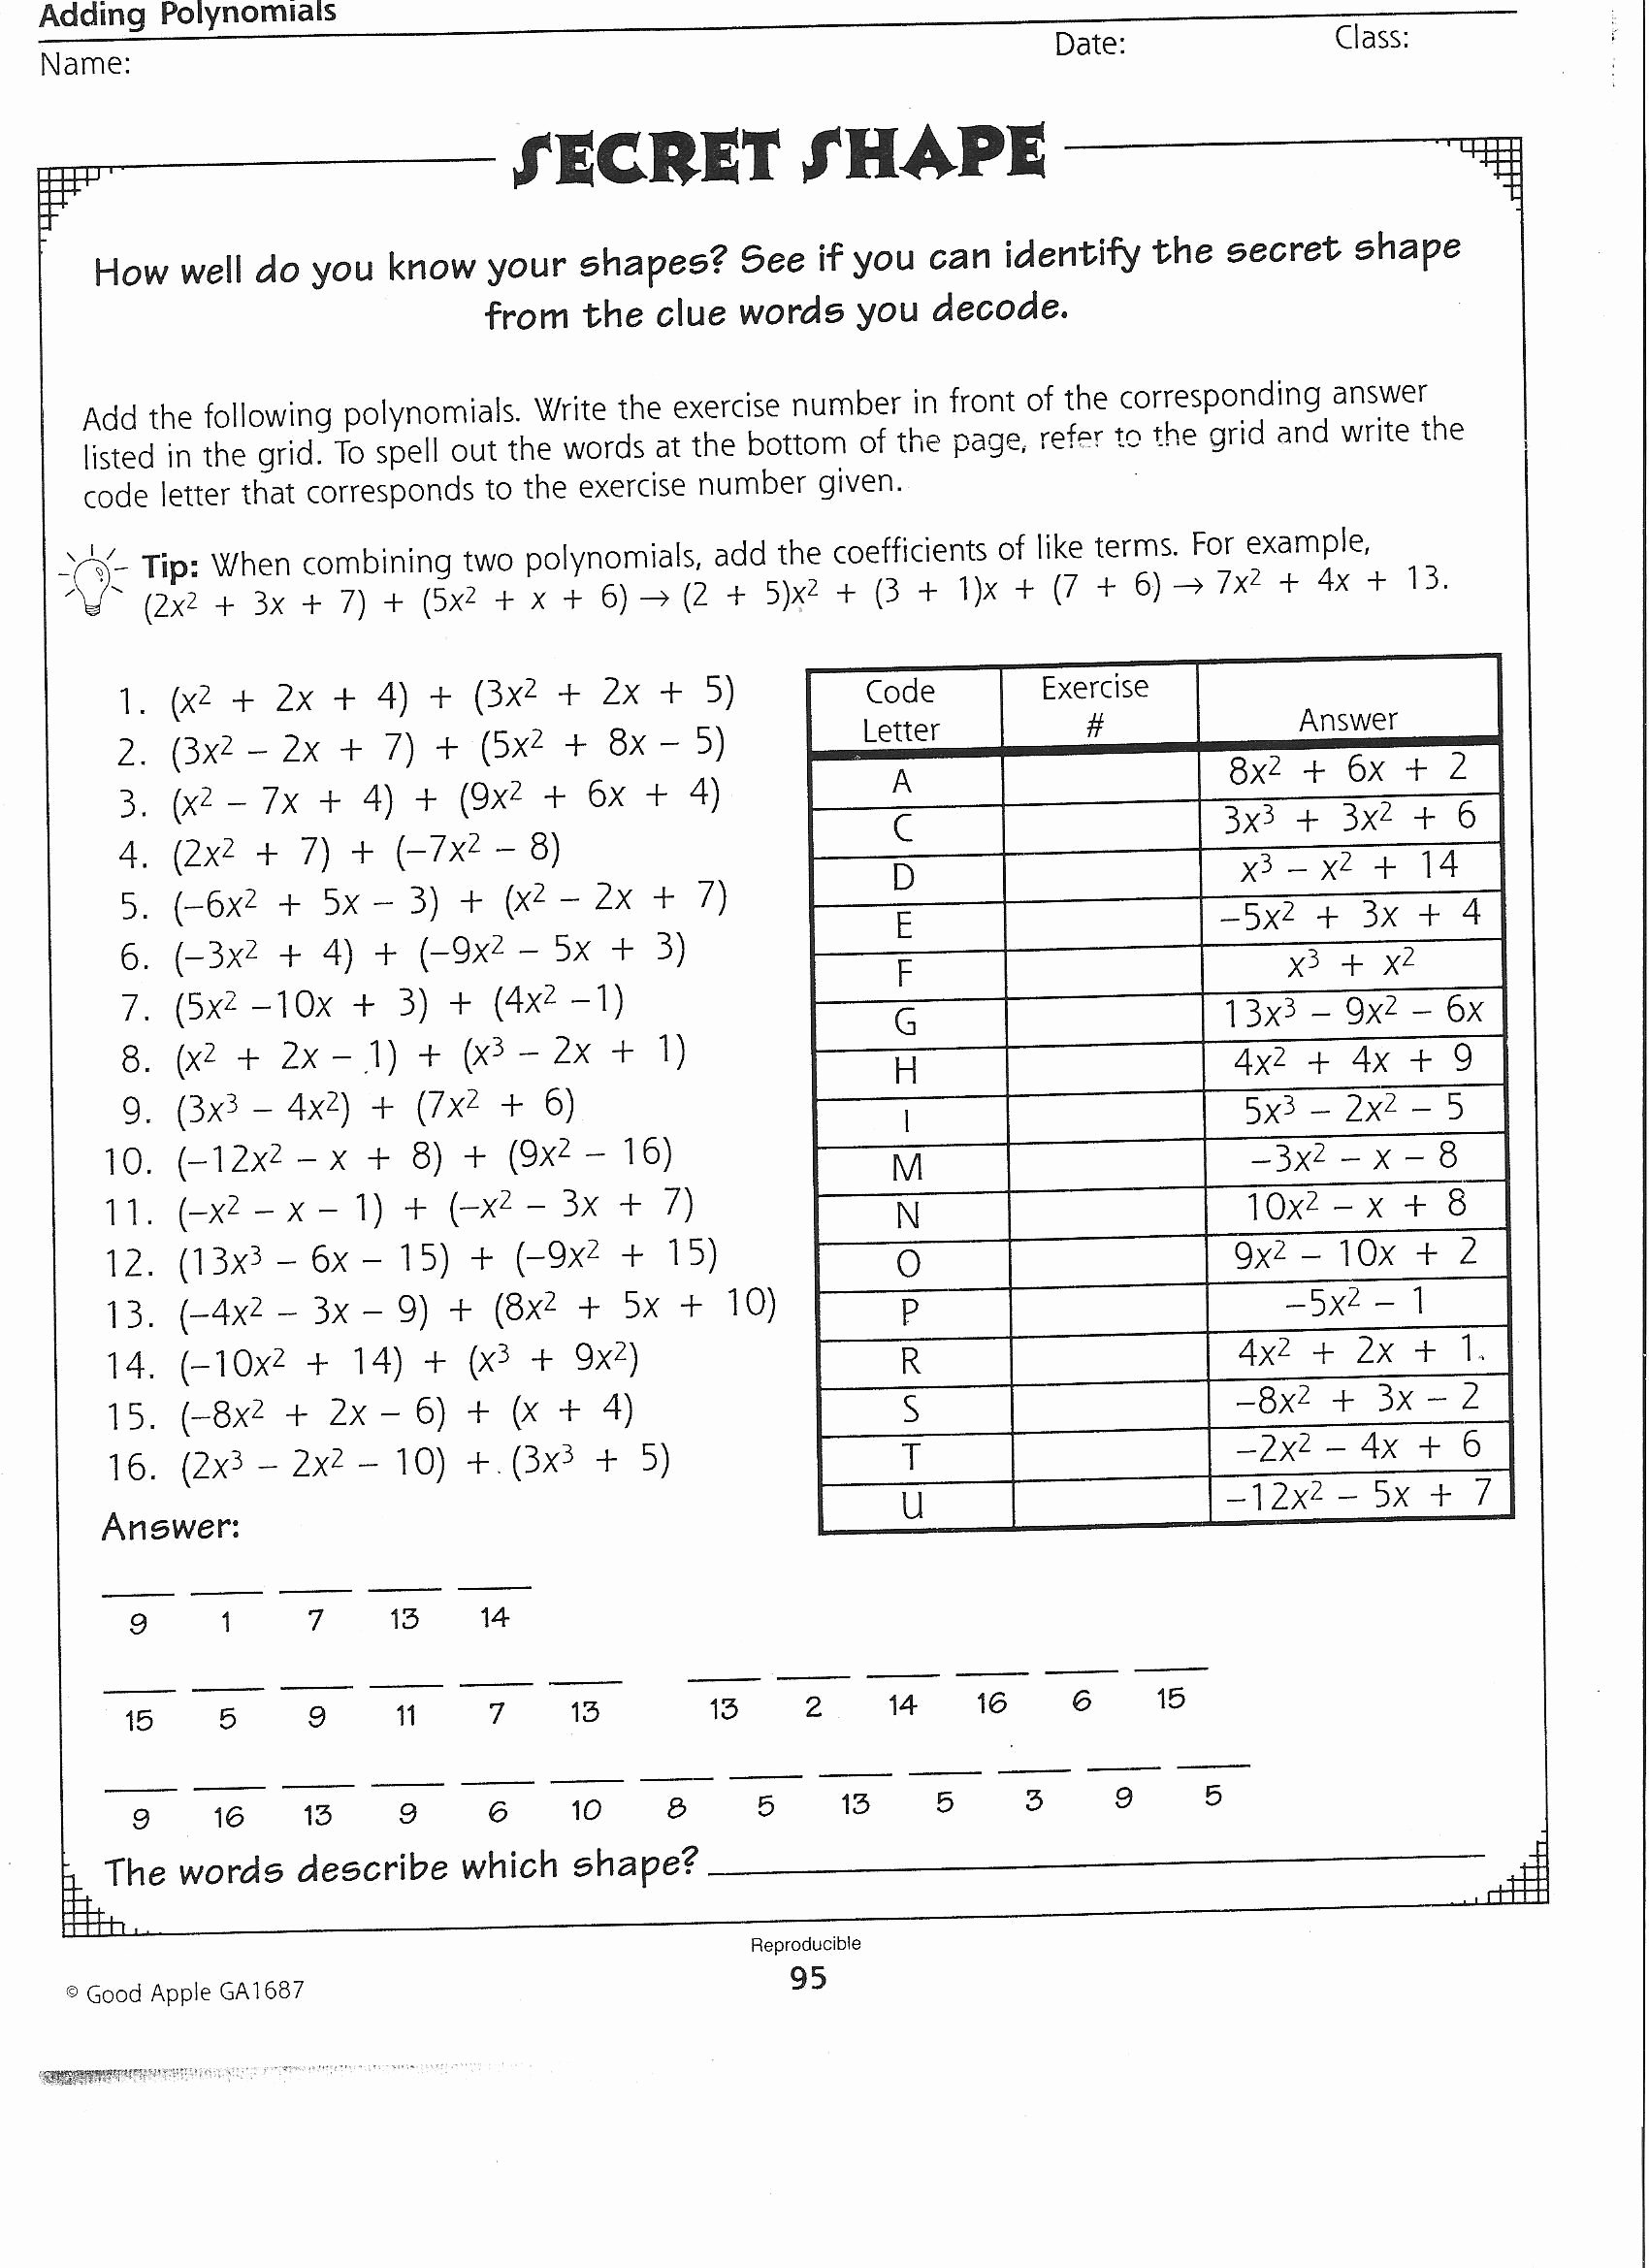 Adding and Subtracting Polynomials Worksheet Luxury Adding and Subtracting Polynomials Worksheet Free